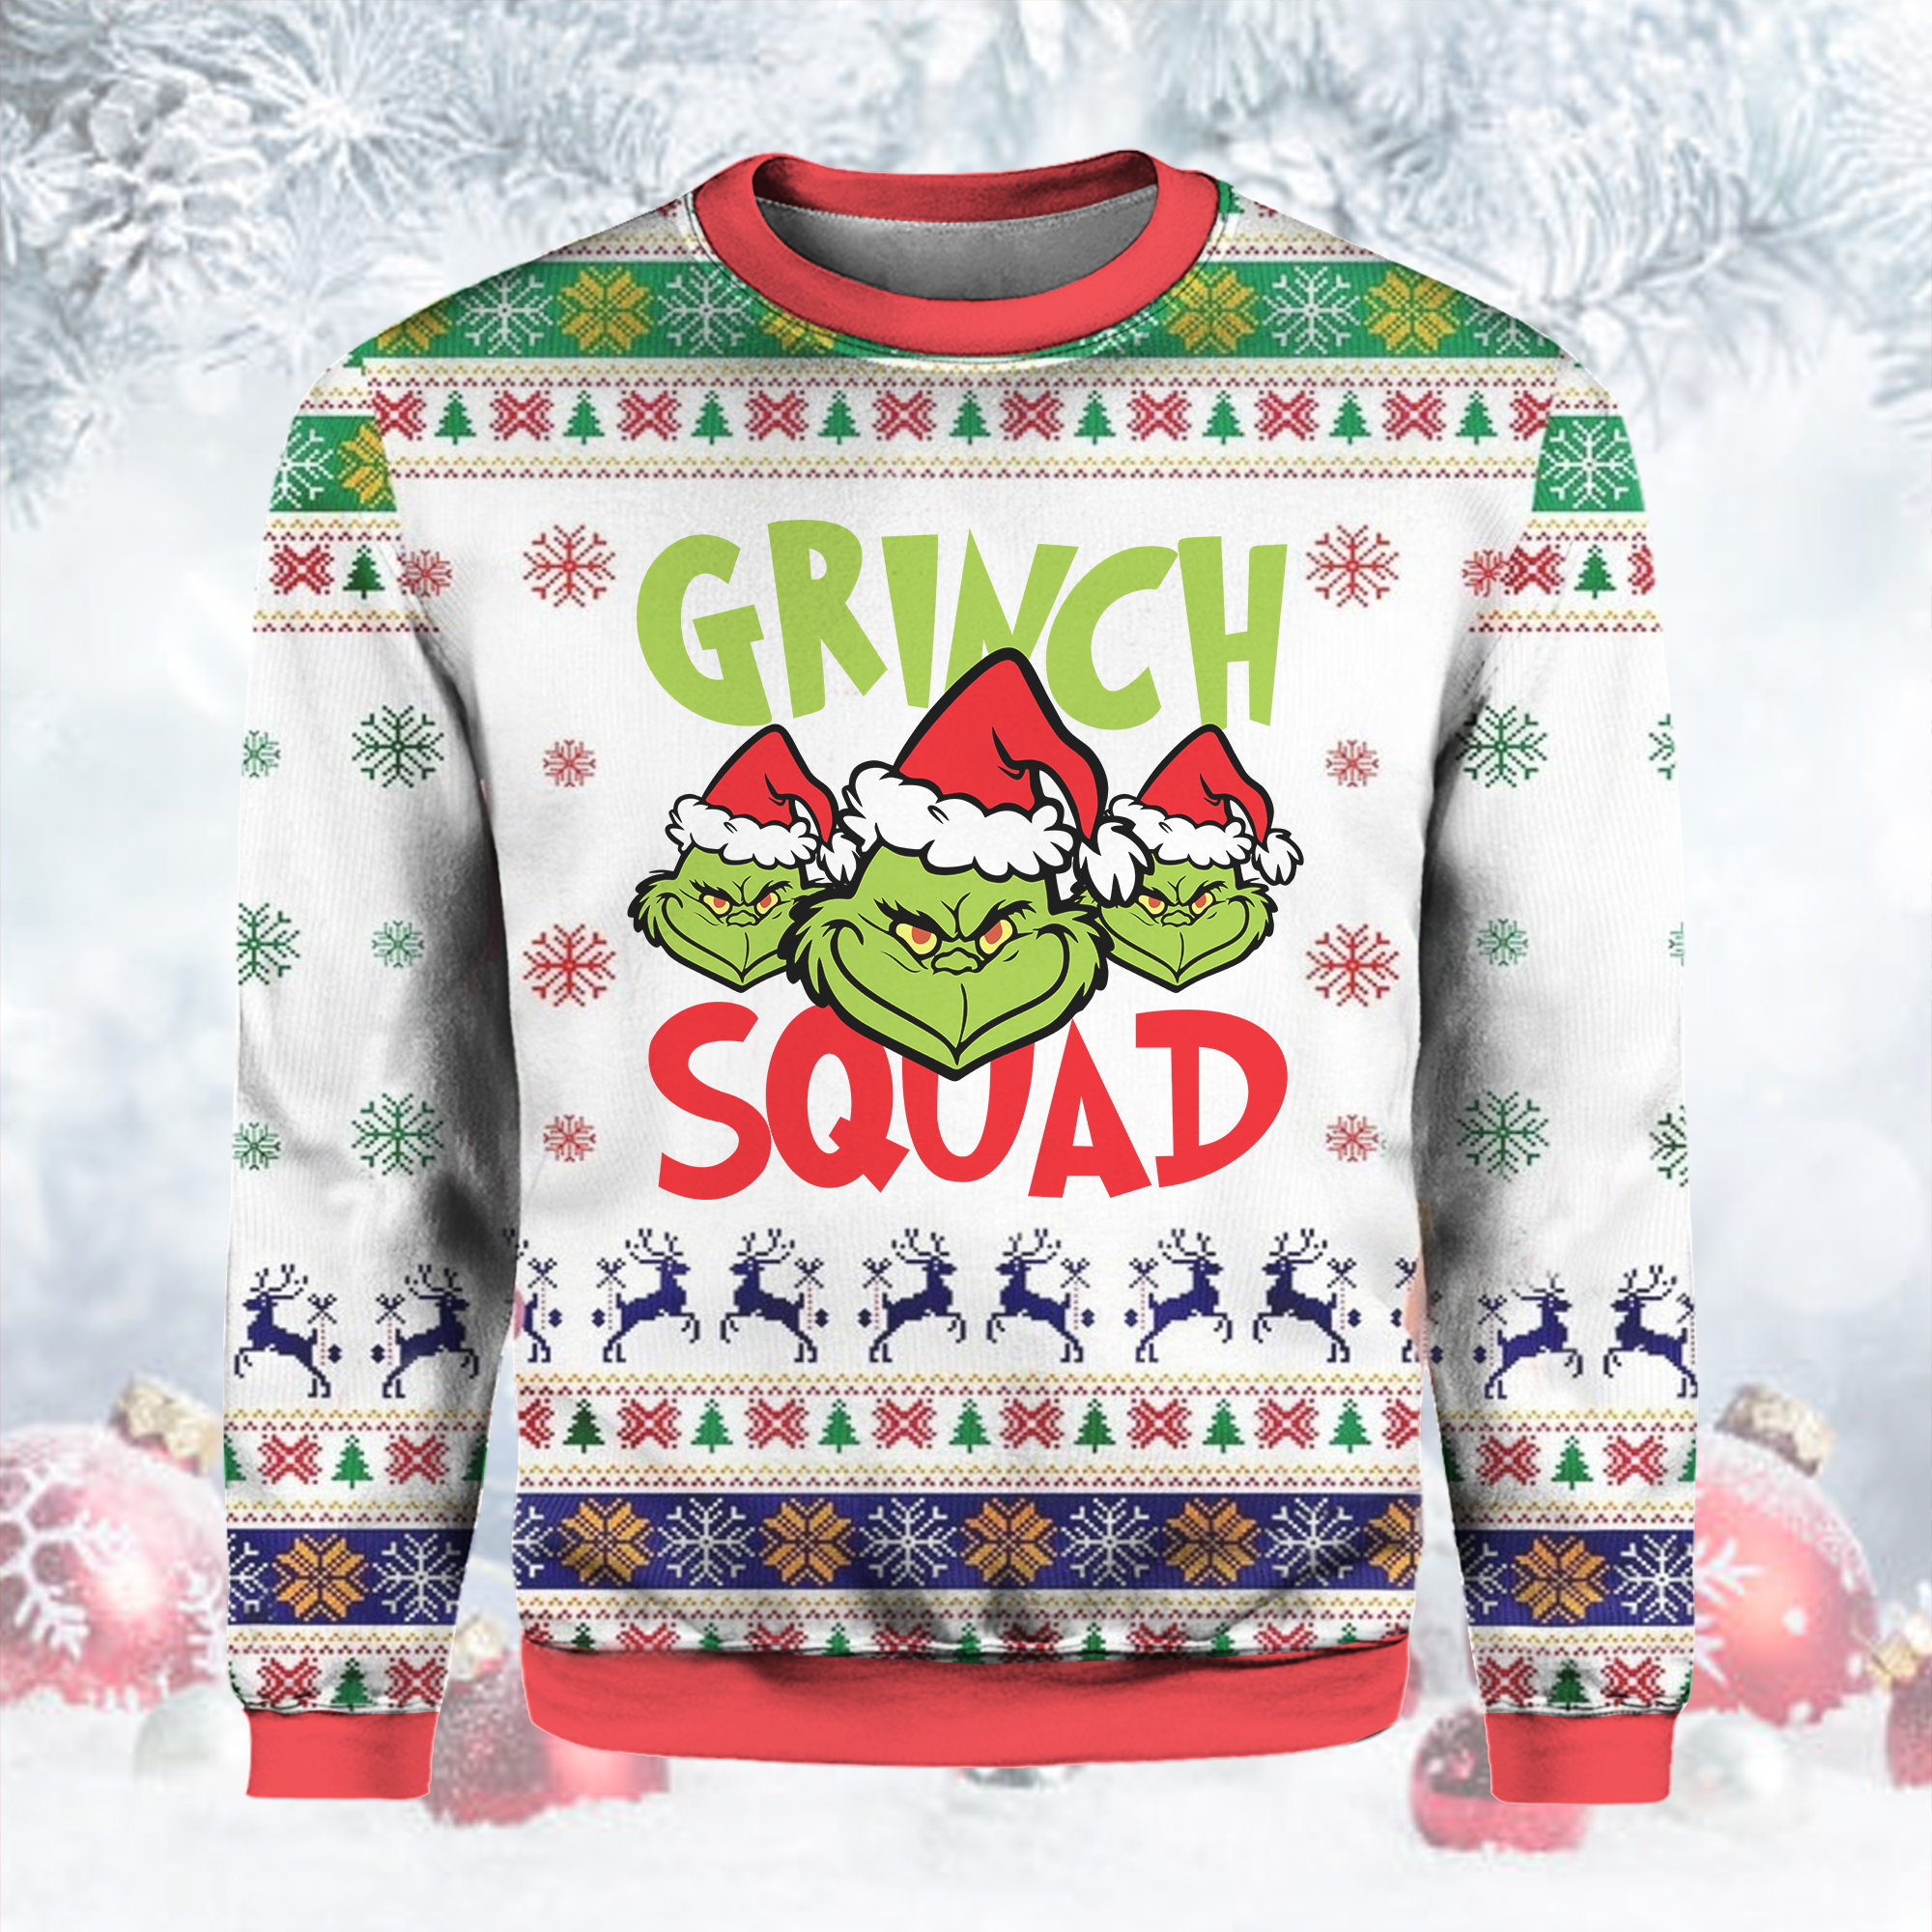 It's Christmas Maker's Mark Drink Up Grinches Xmas Ugly Sweater 2023 - Owl  Fashion Shop